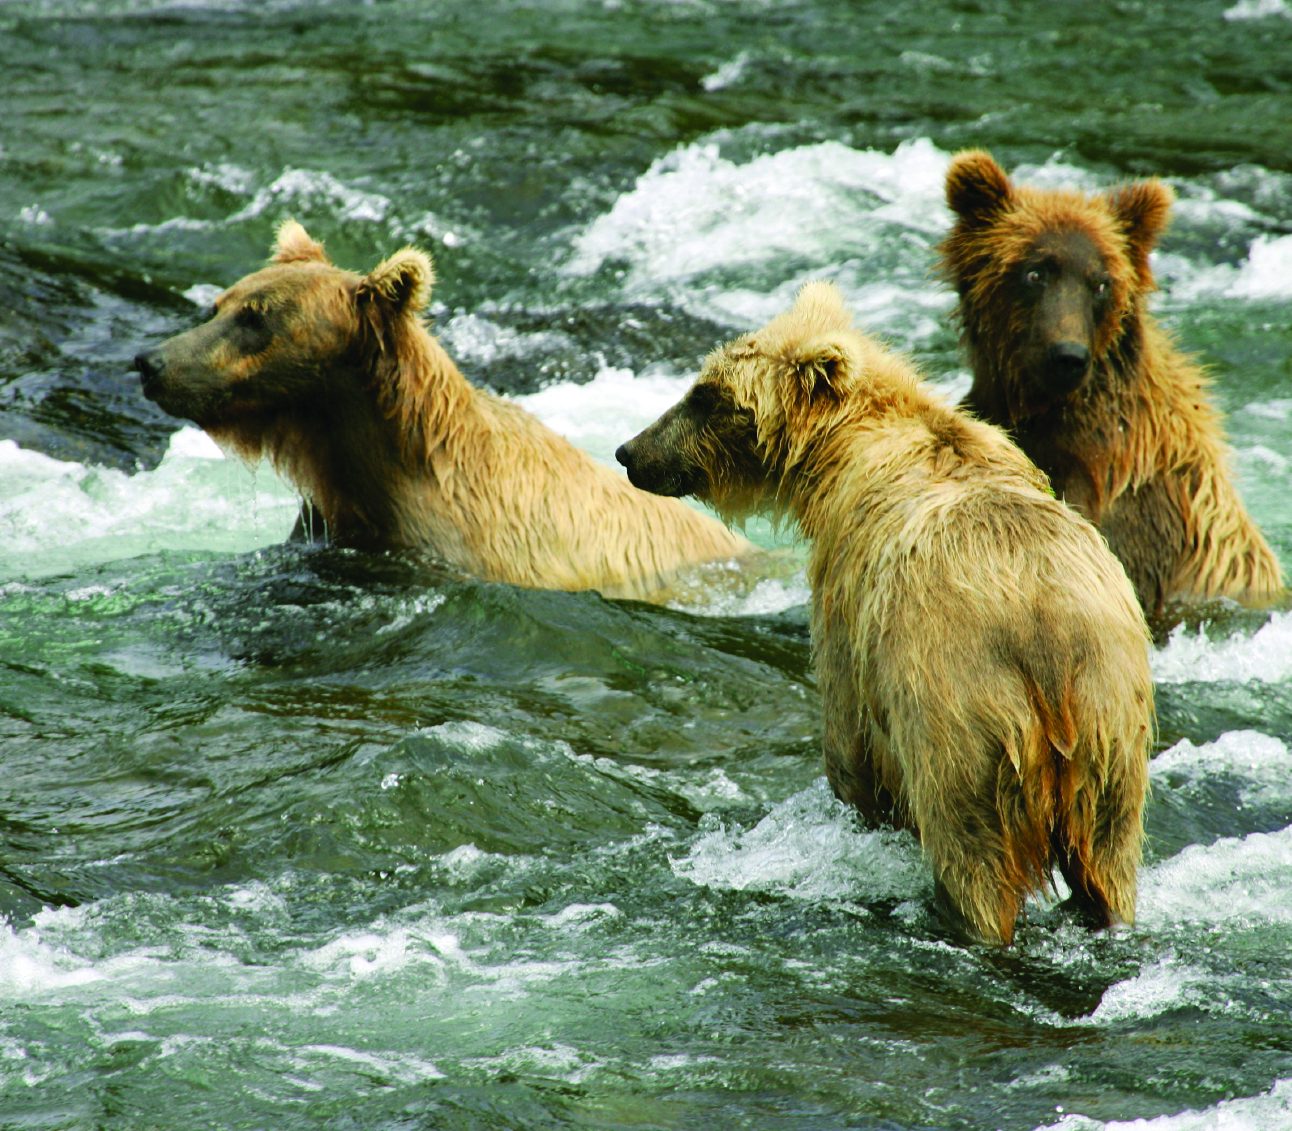 Three bears in a fast flowing river